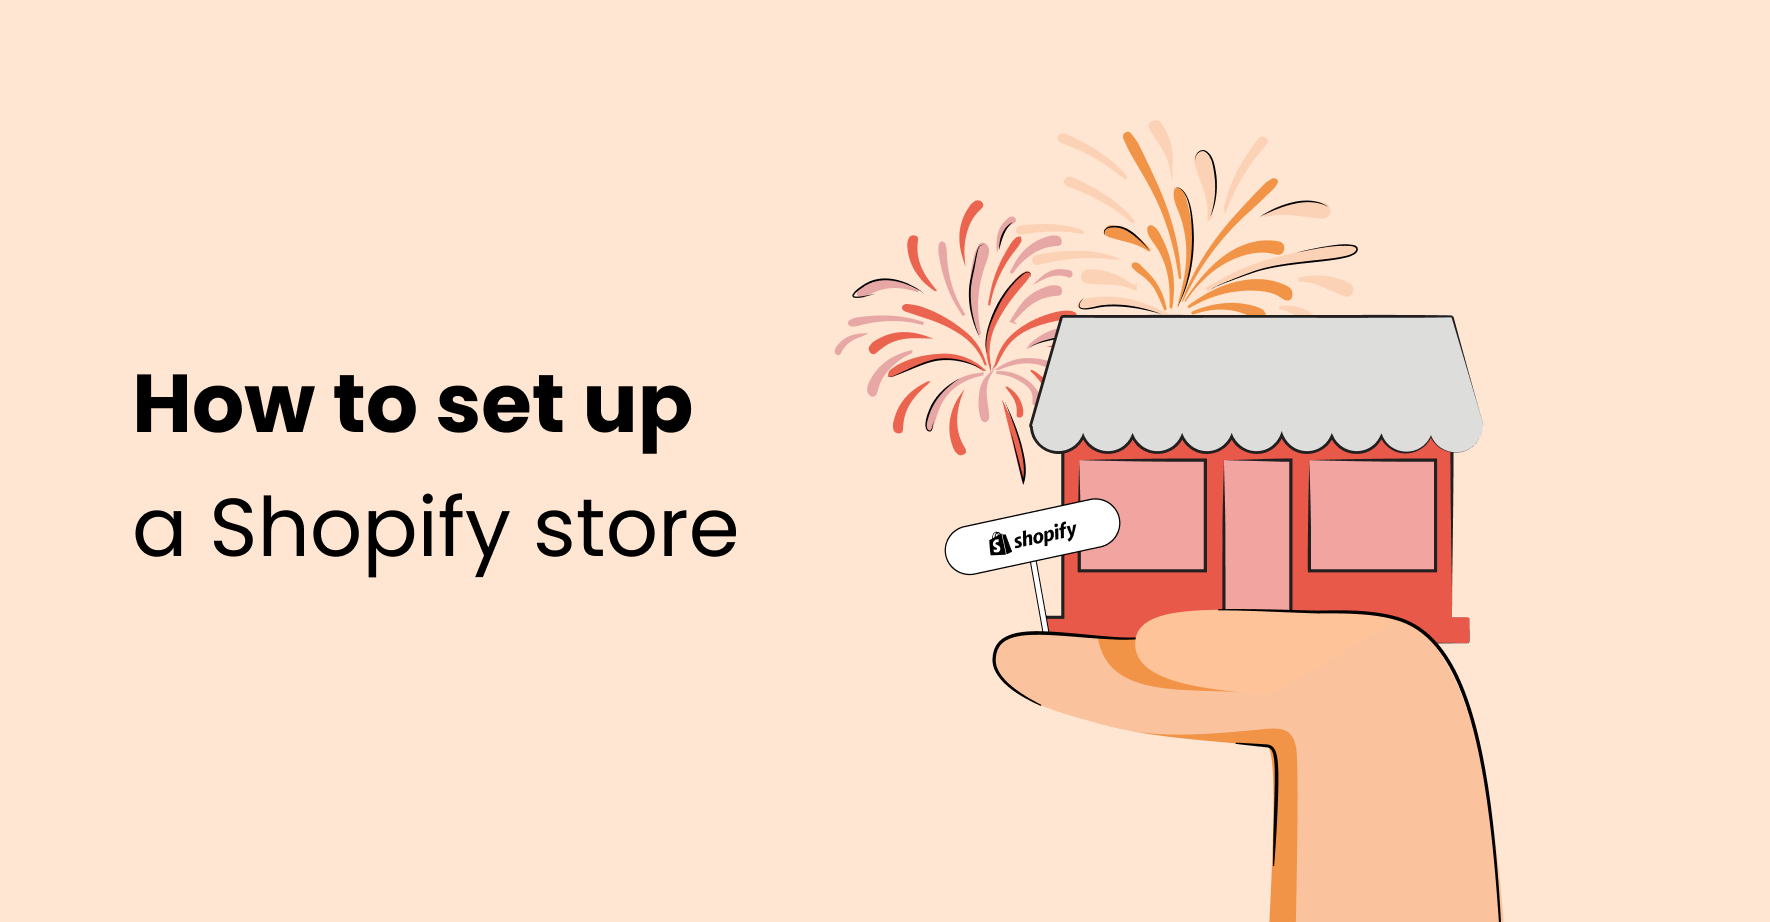 How to set up a Shopify store: step-by-step guide from idea to launch